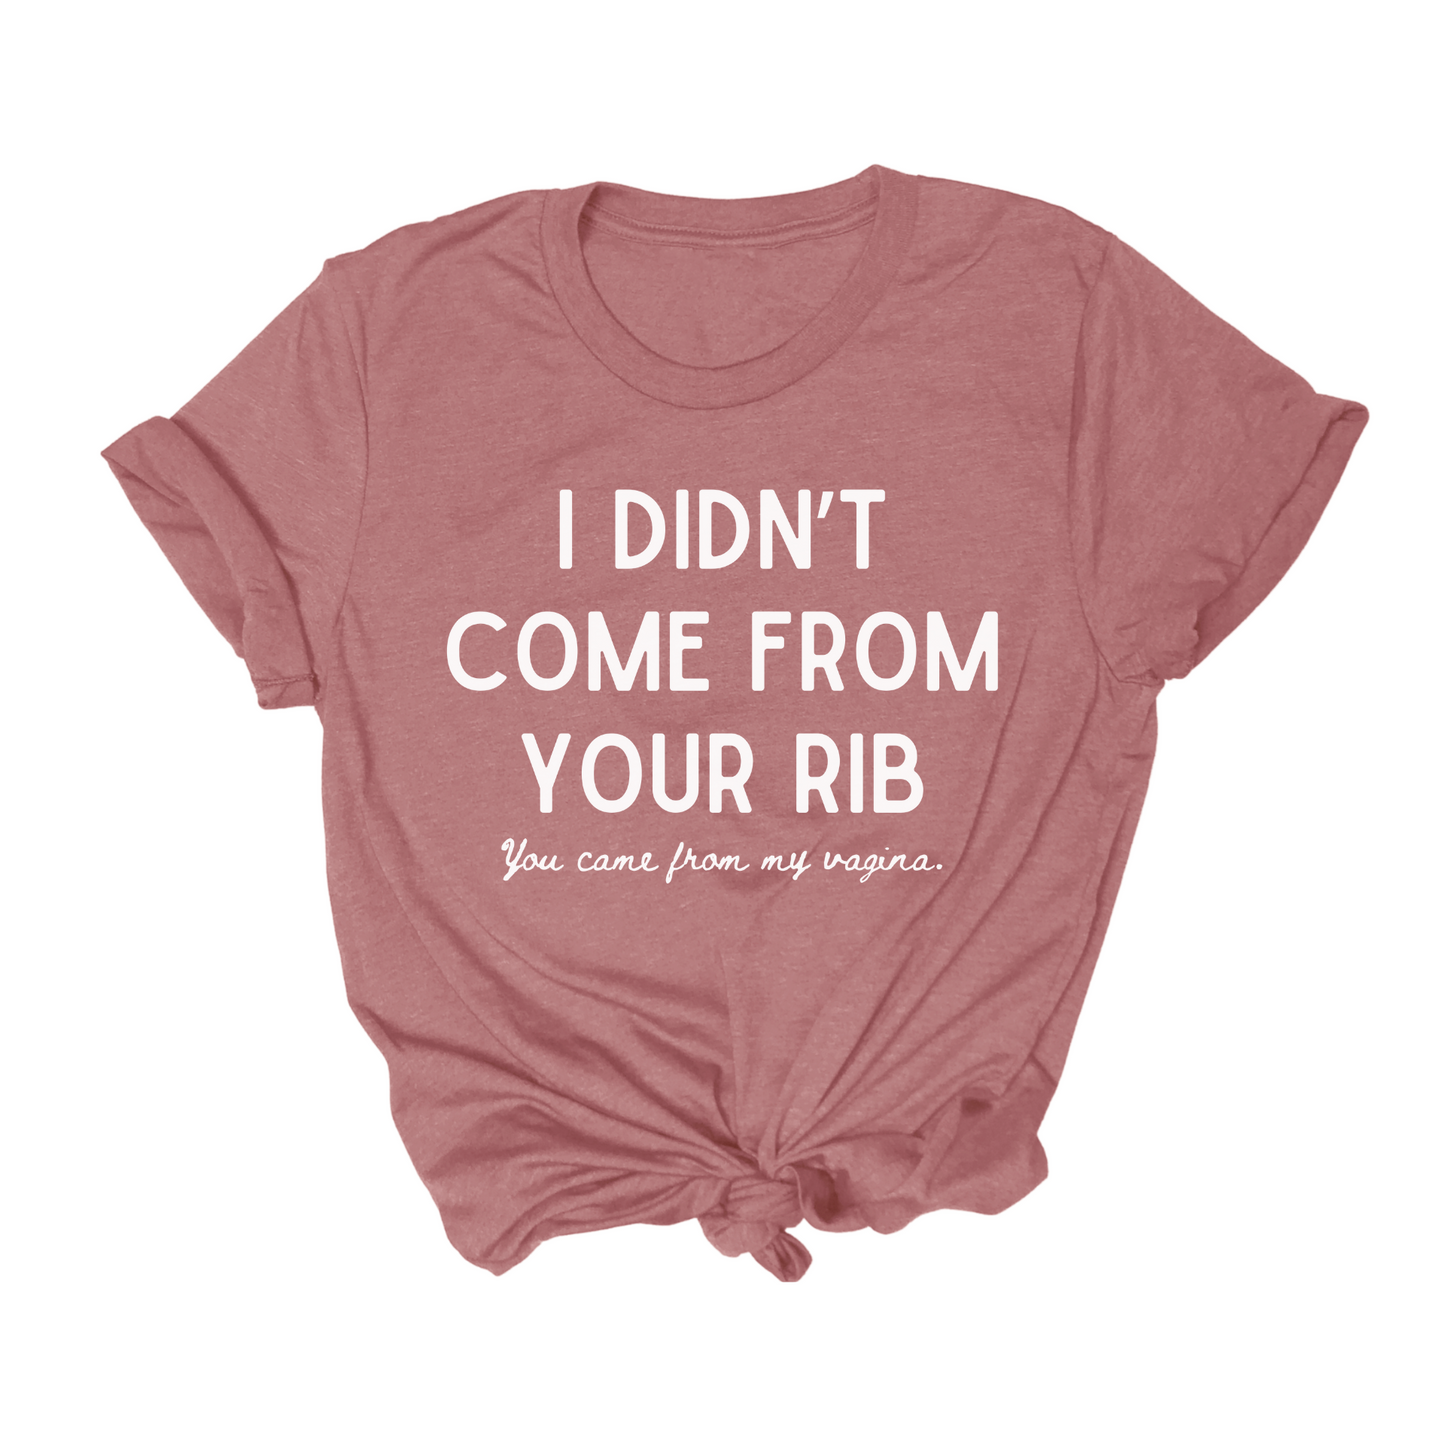 Feminist themed t shirt that says "I didn't come from your rib you came from my vagina."